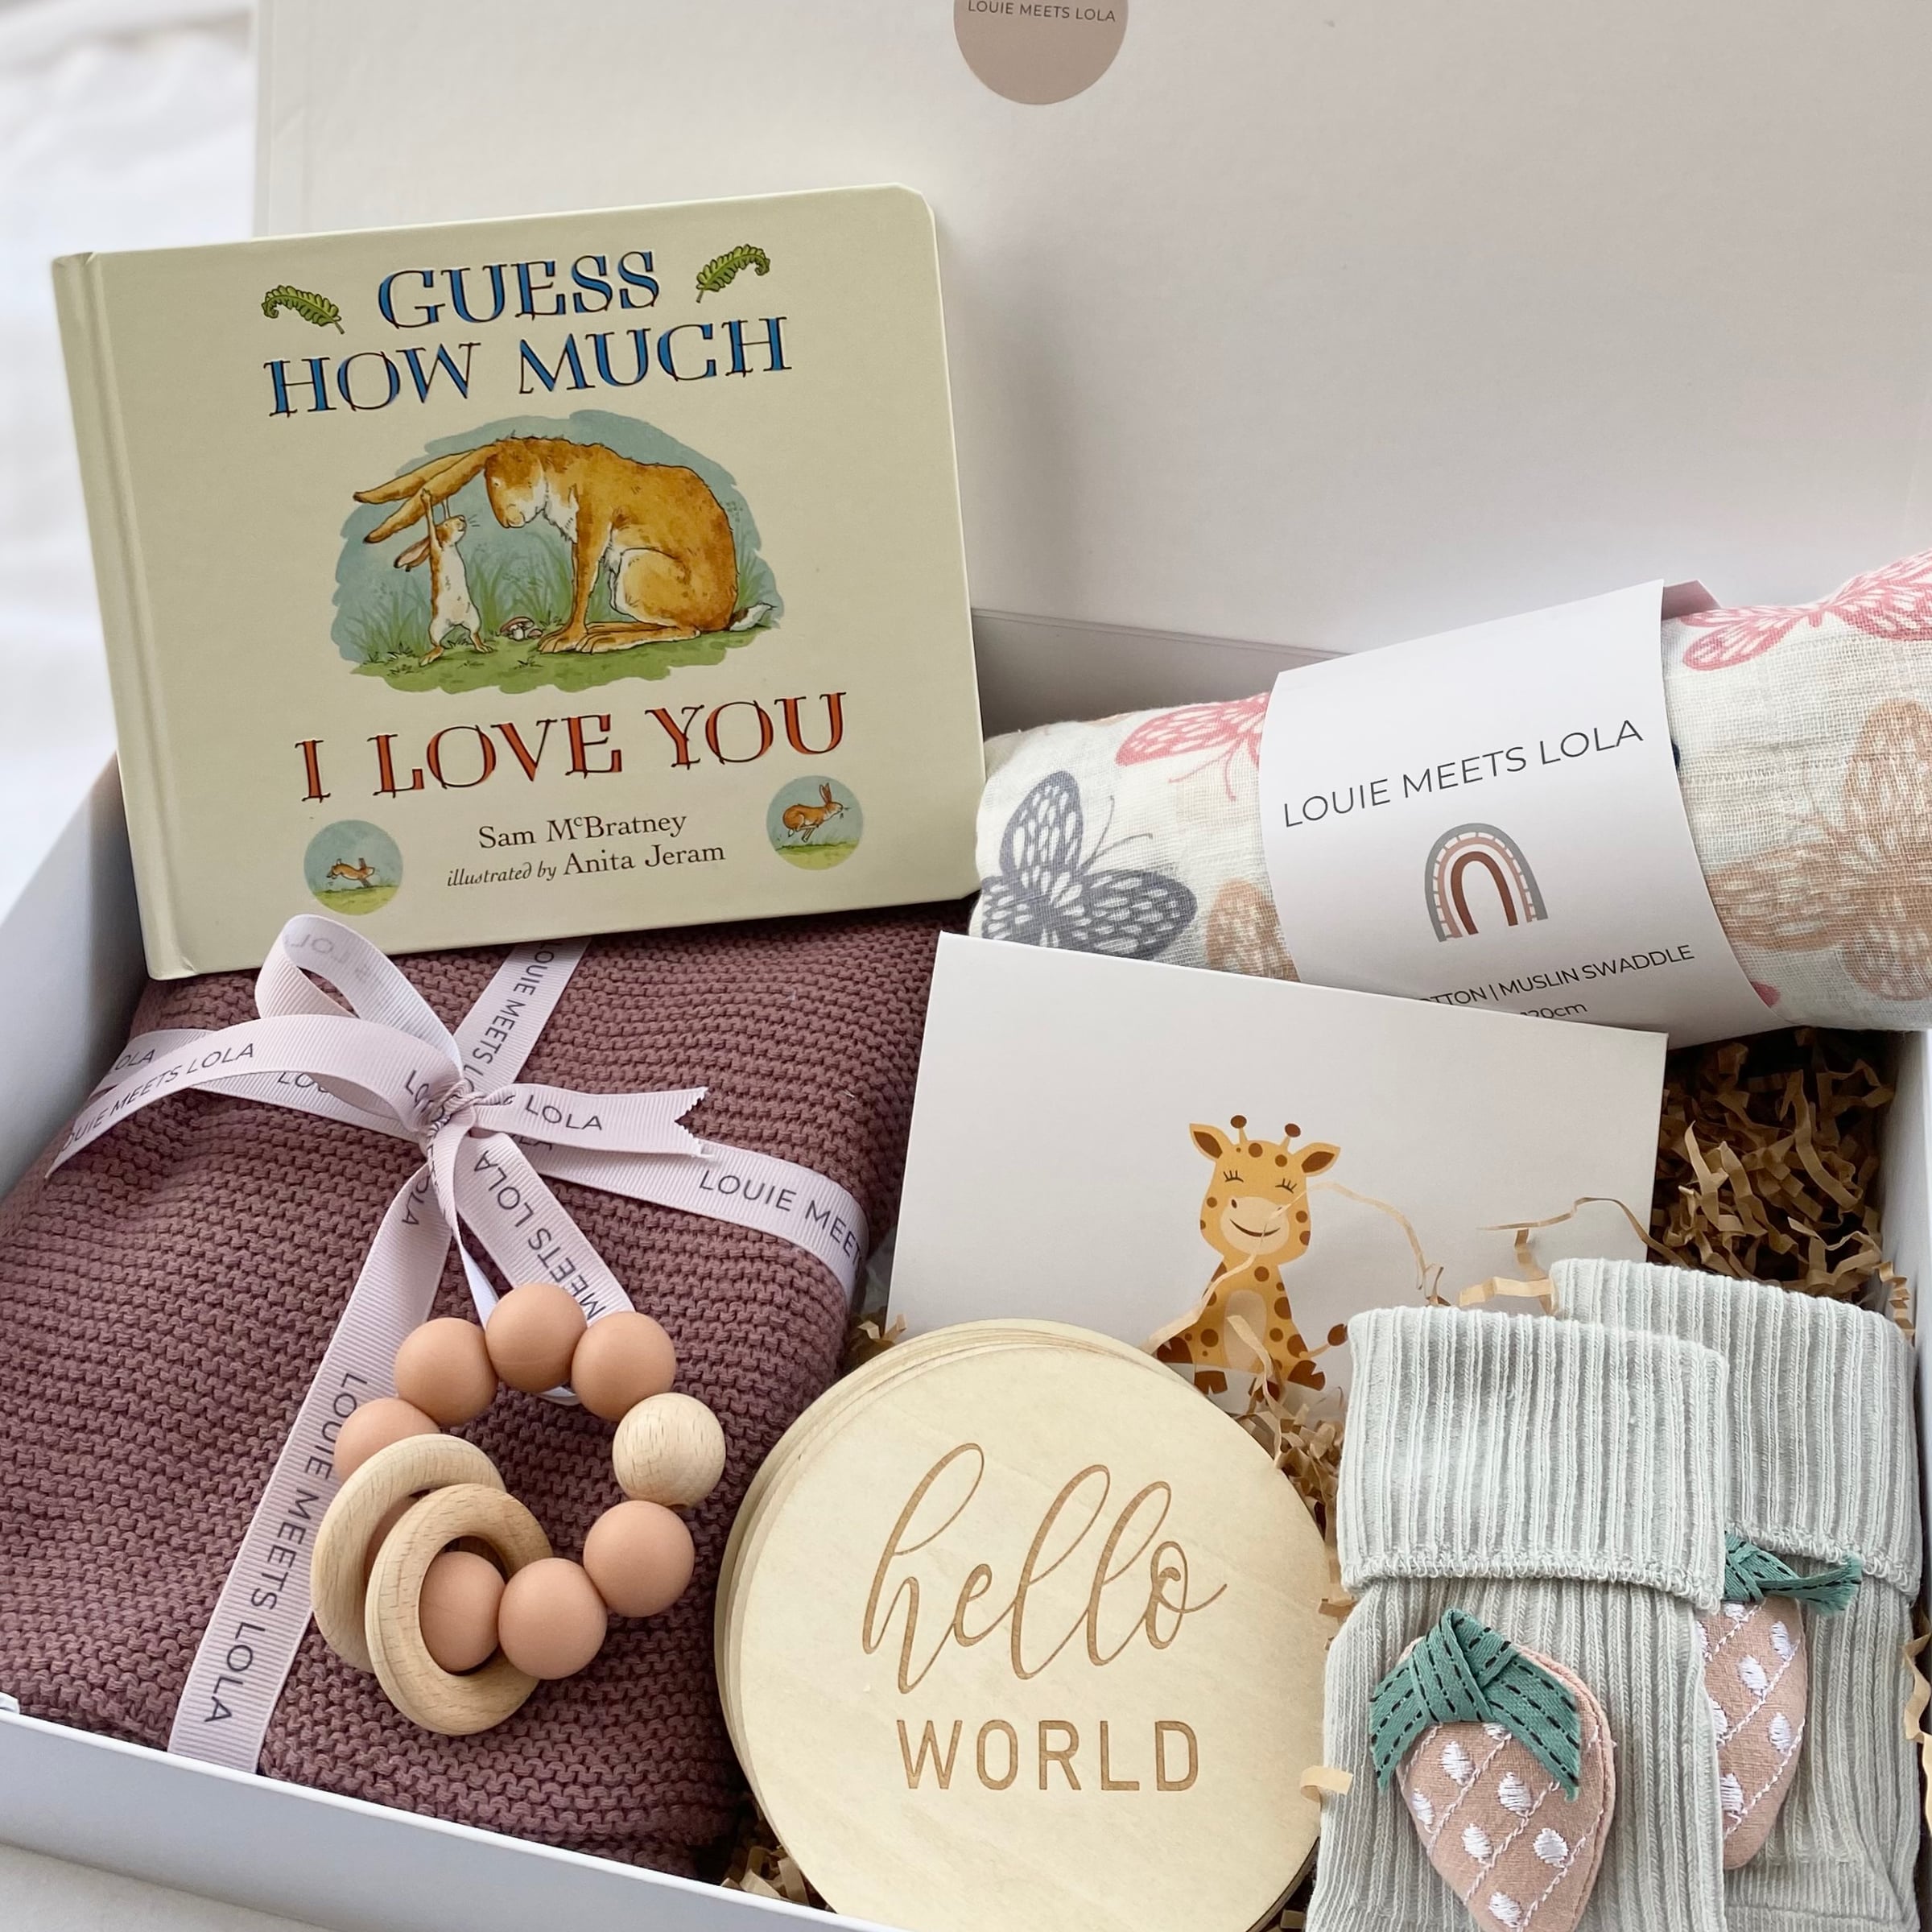 Packed with Love Gift Hamper - Maroon - Buy Baby Gift Sets at Louie Meets Lola